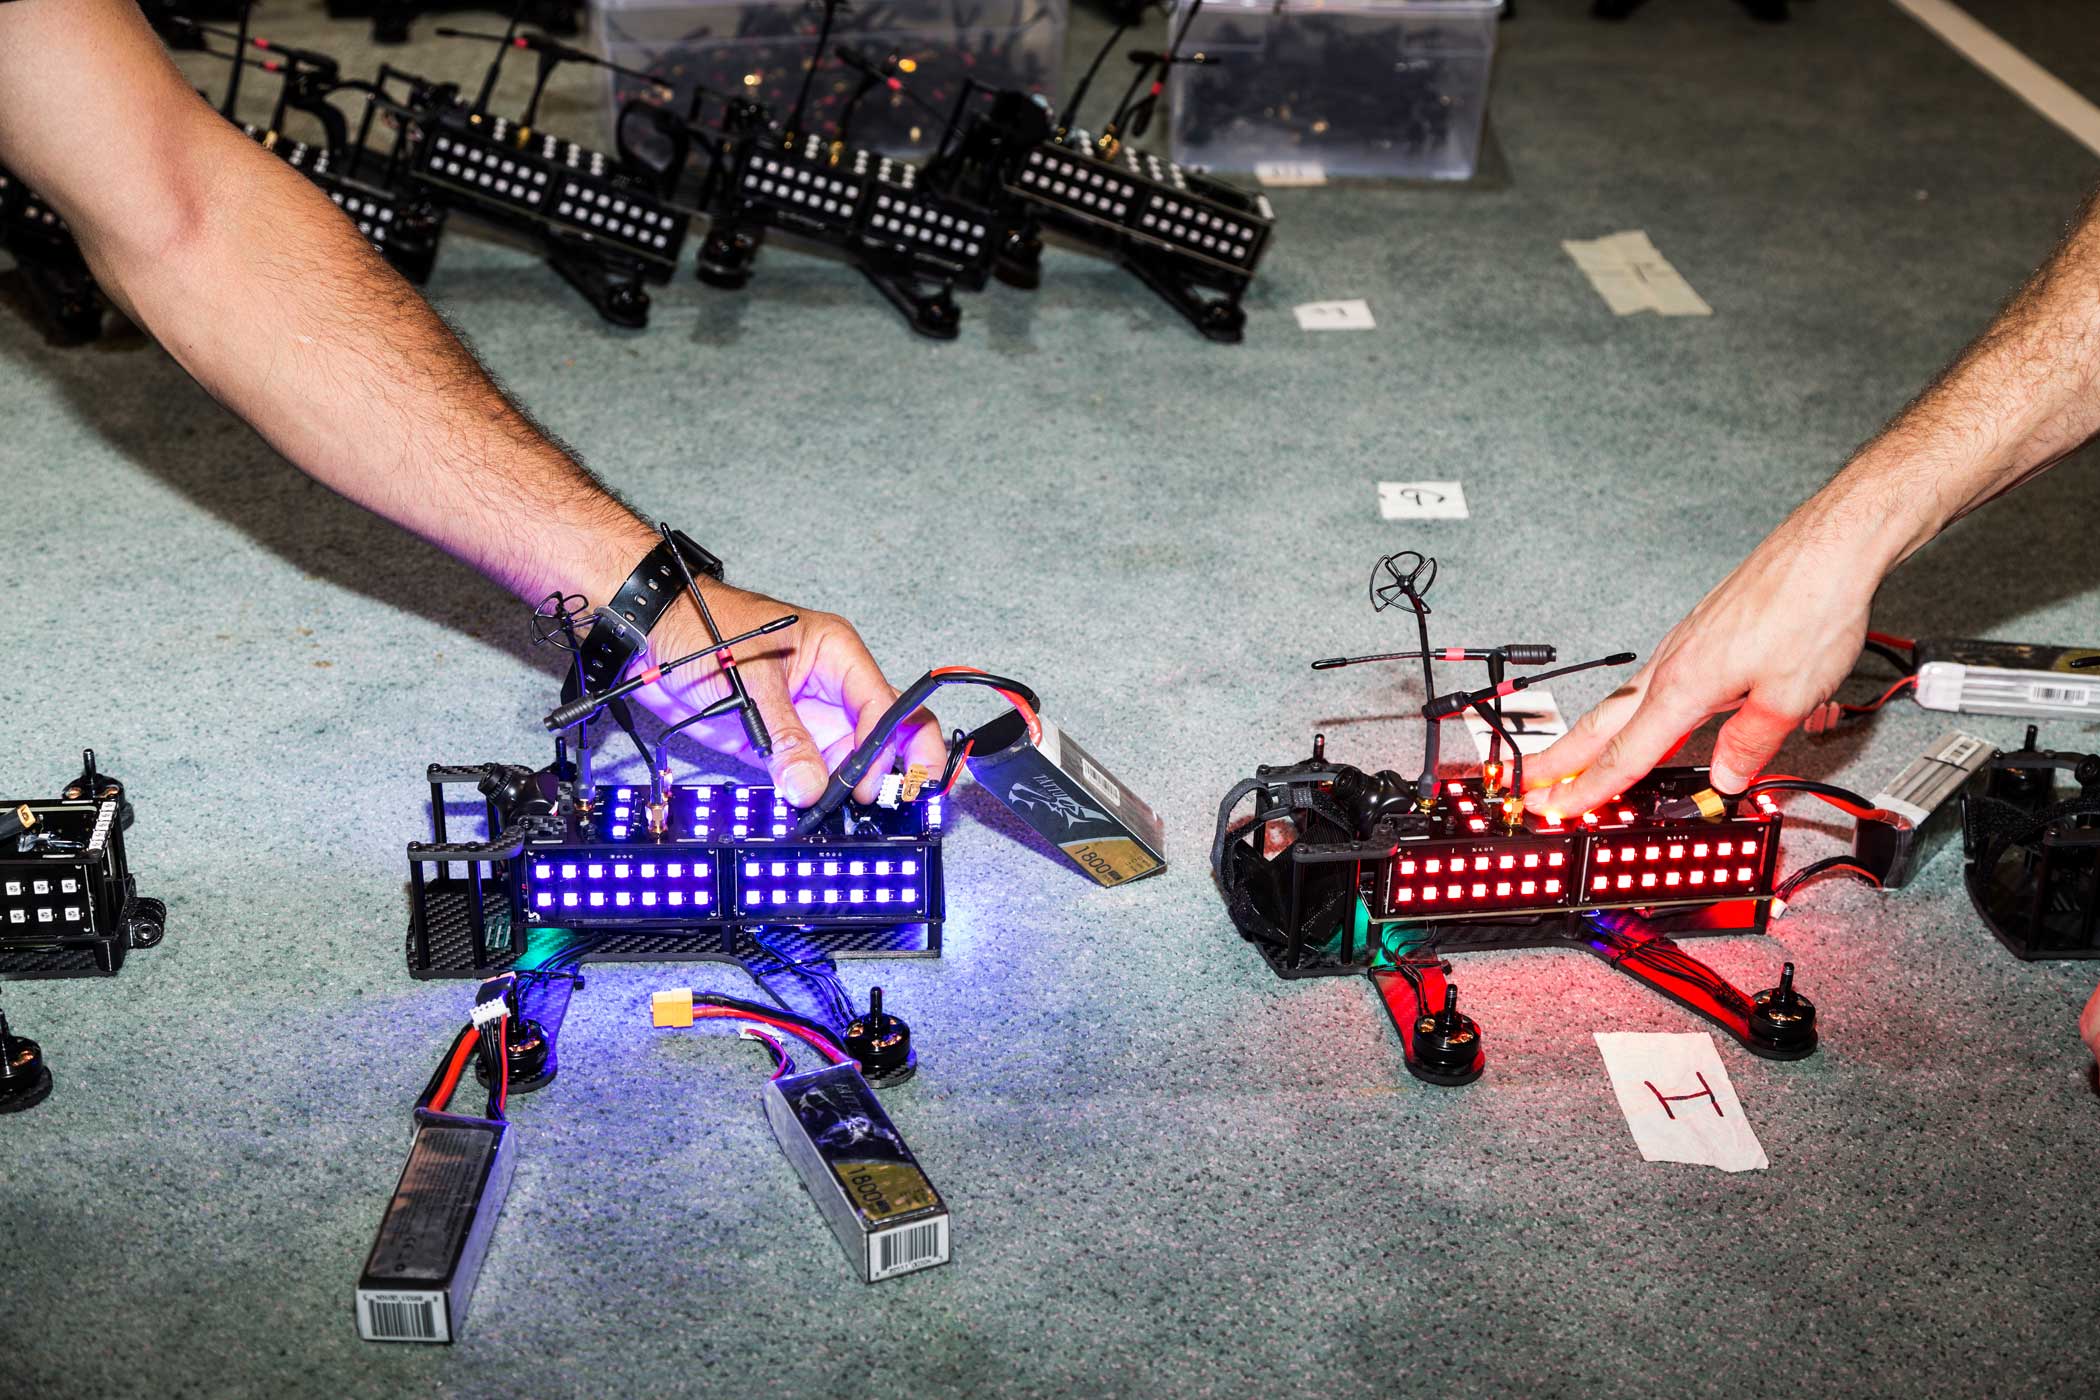 The LED lights on two racing drones are tested at the Drone Racing League offices on July 28, 2016 in New York.